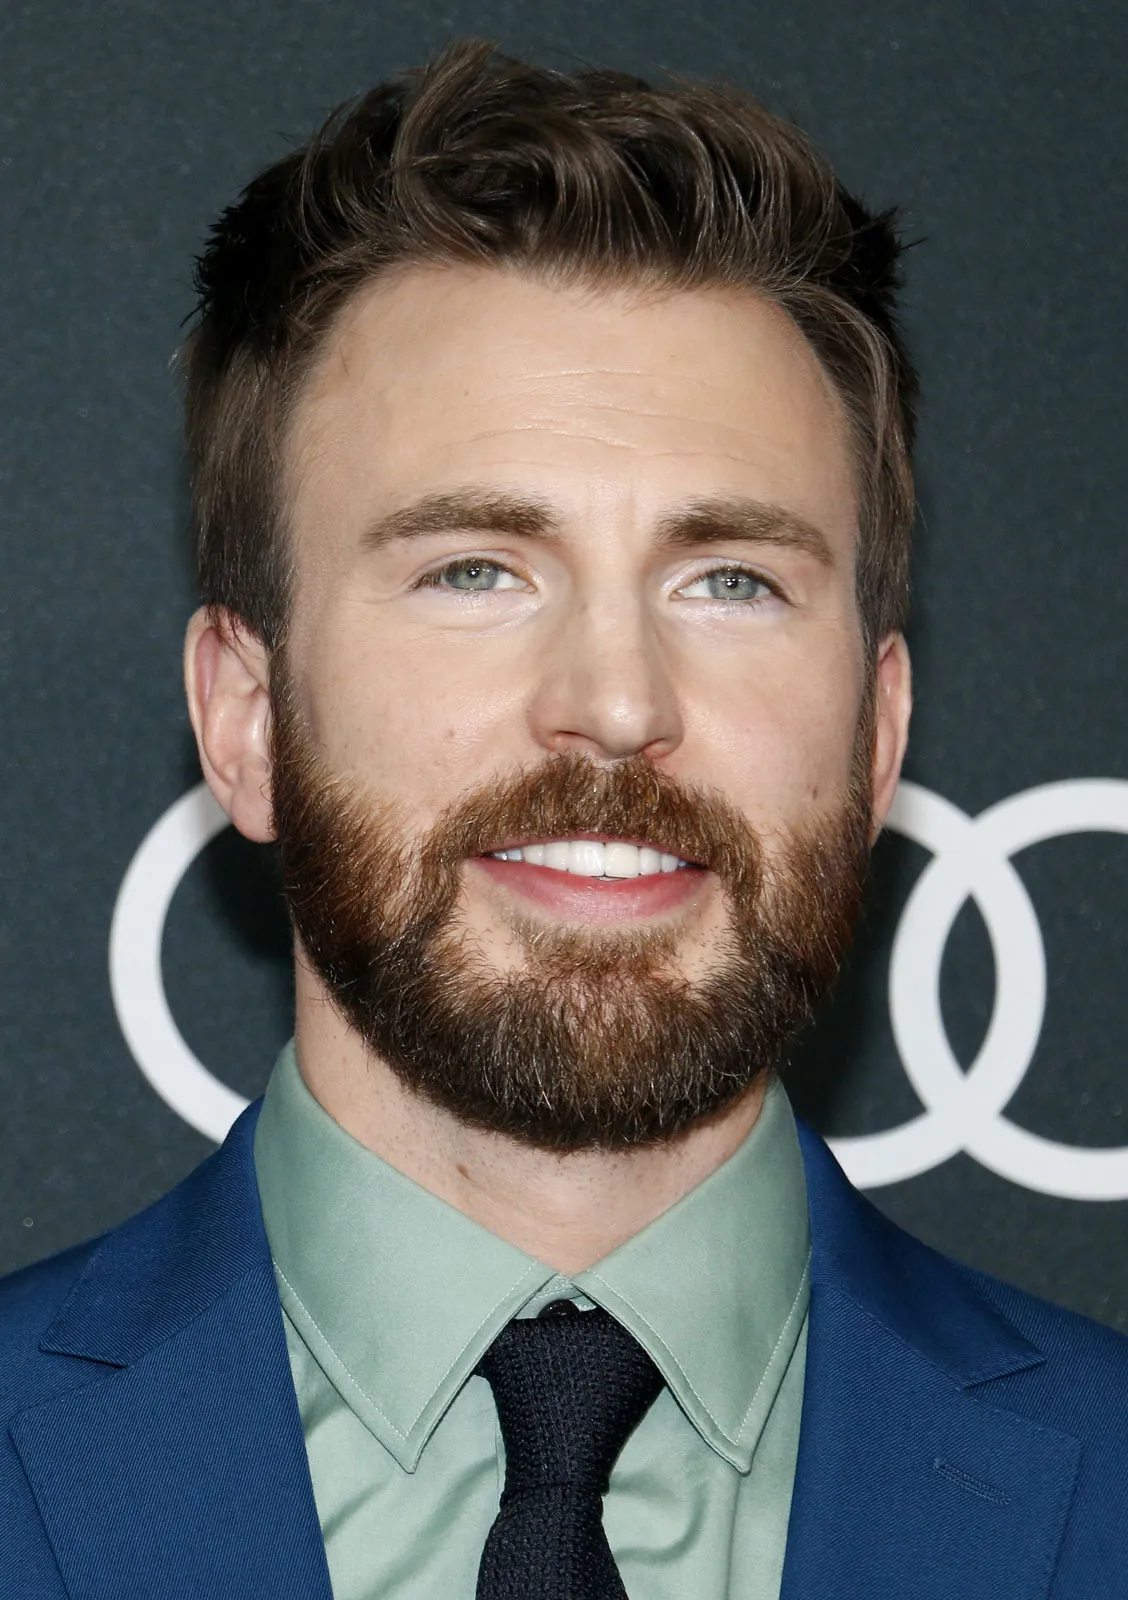 chris evans middle name